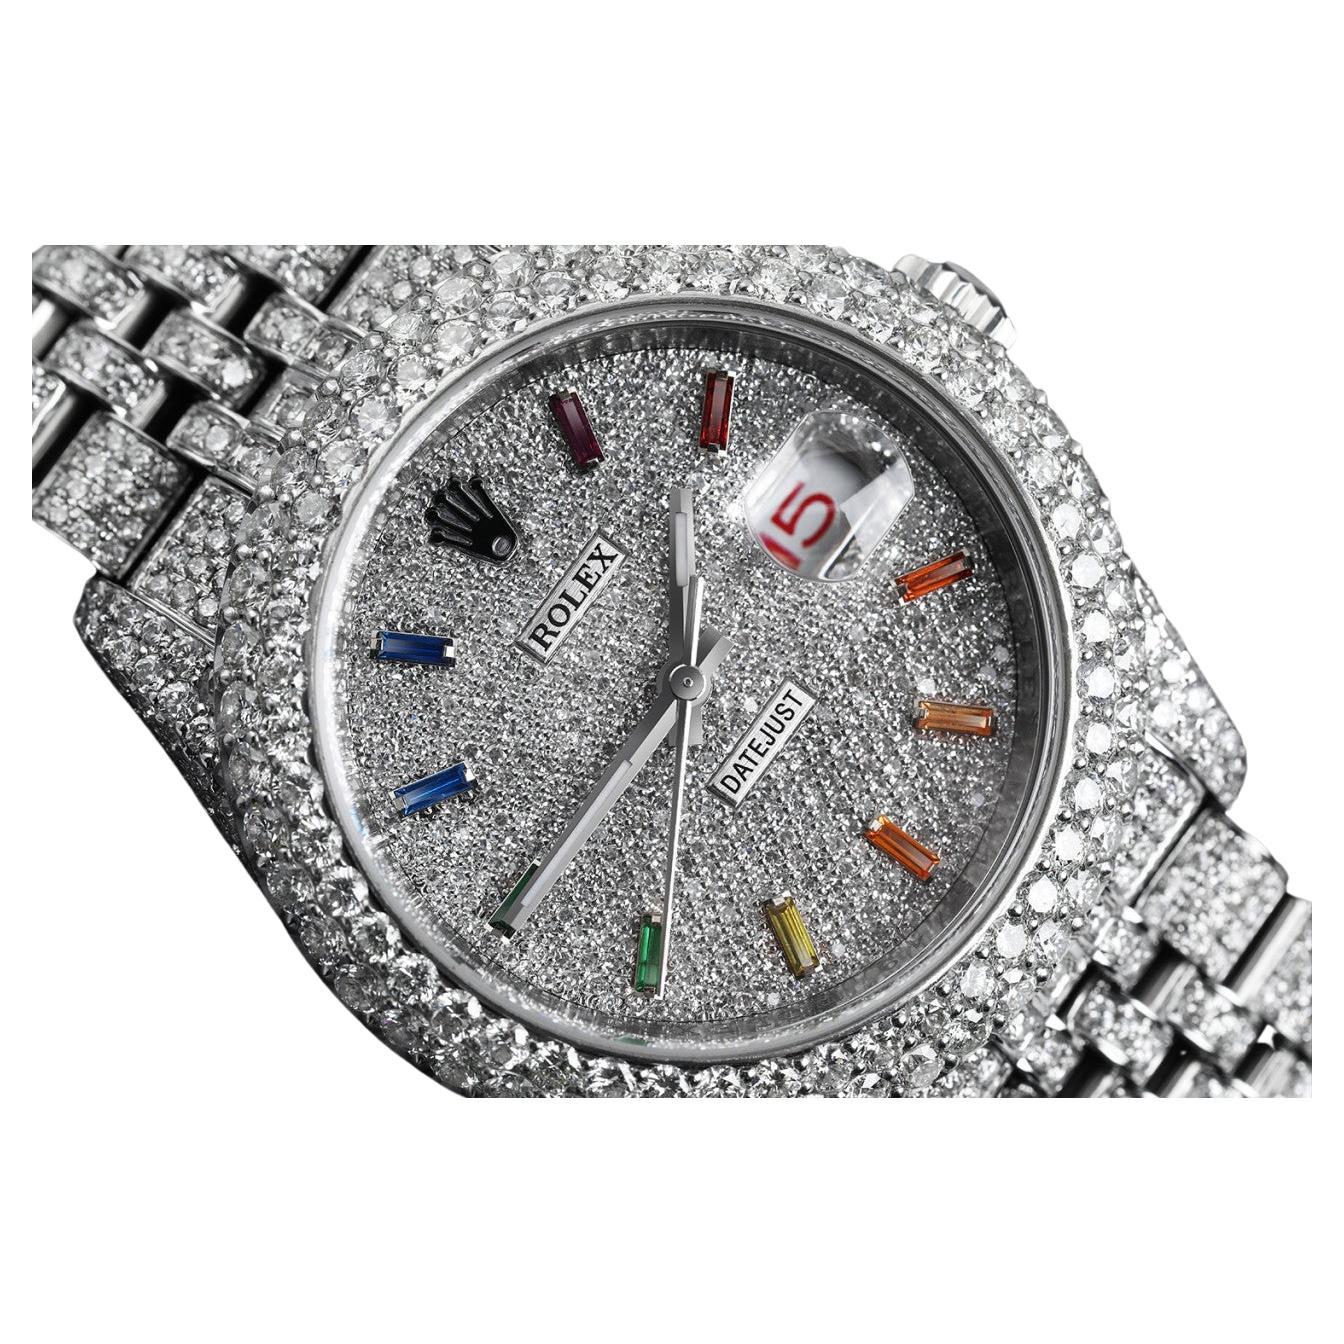 Rolex Datejust Stainless Steel Rainbow Index Pave Diamond Dial Fully Iced For Sale